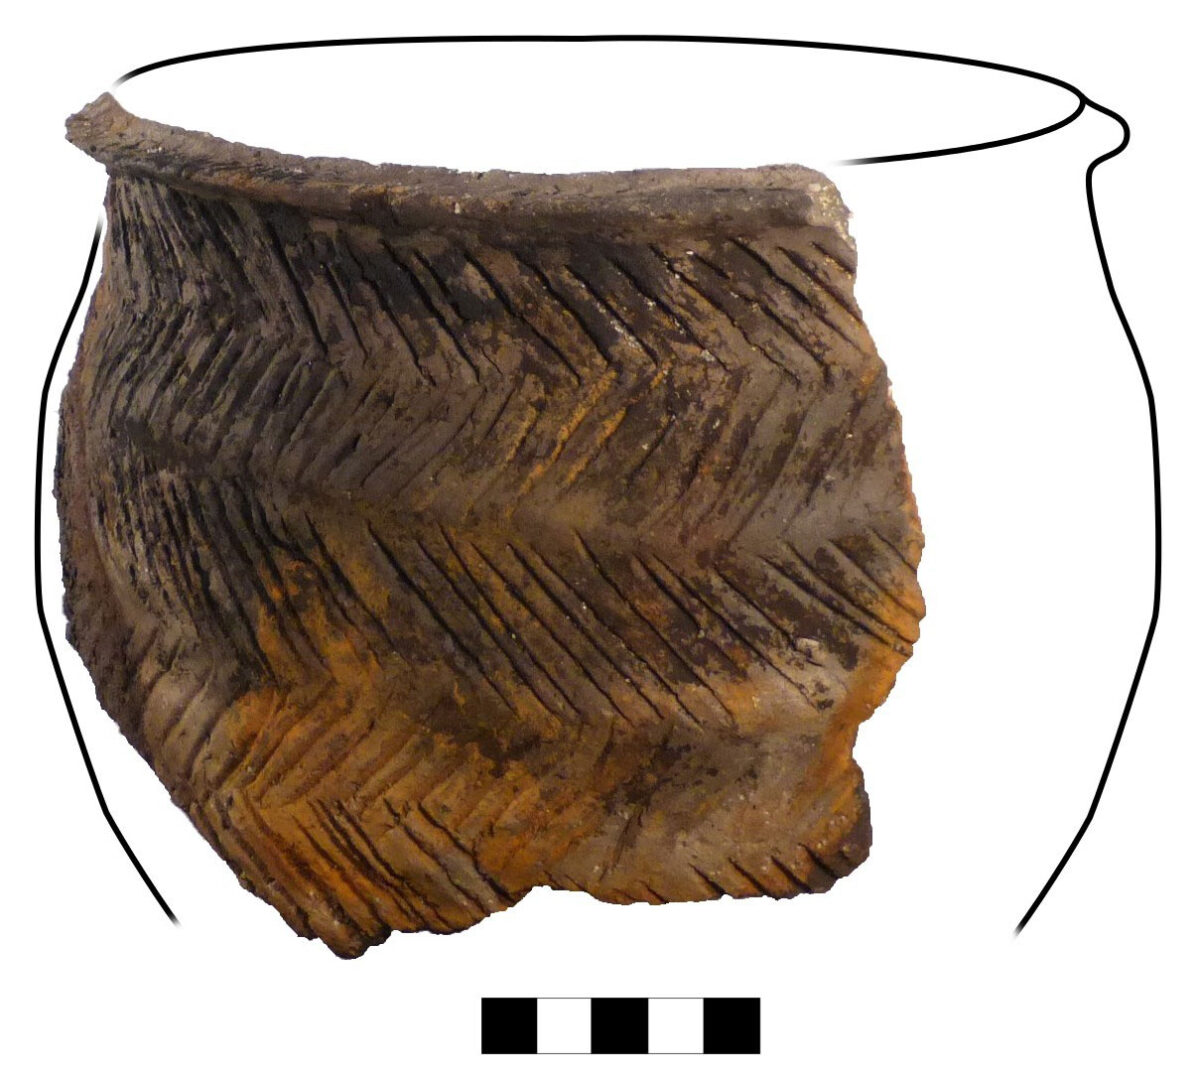 Photo reconstruction of one of the pots from Loch Langabhat. Image credit : Mike Copper